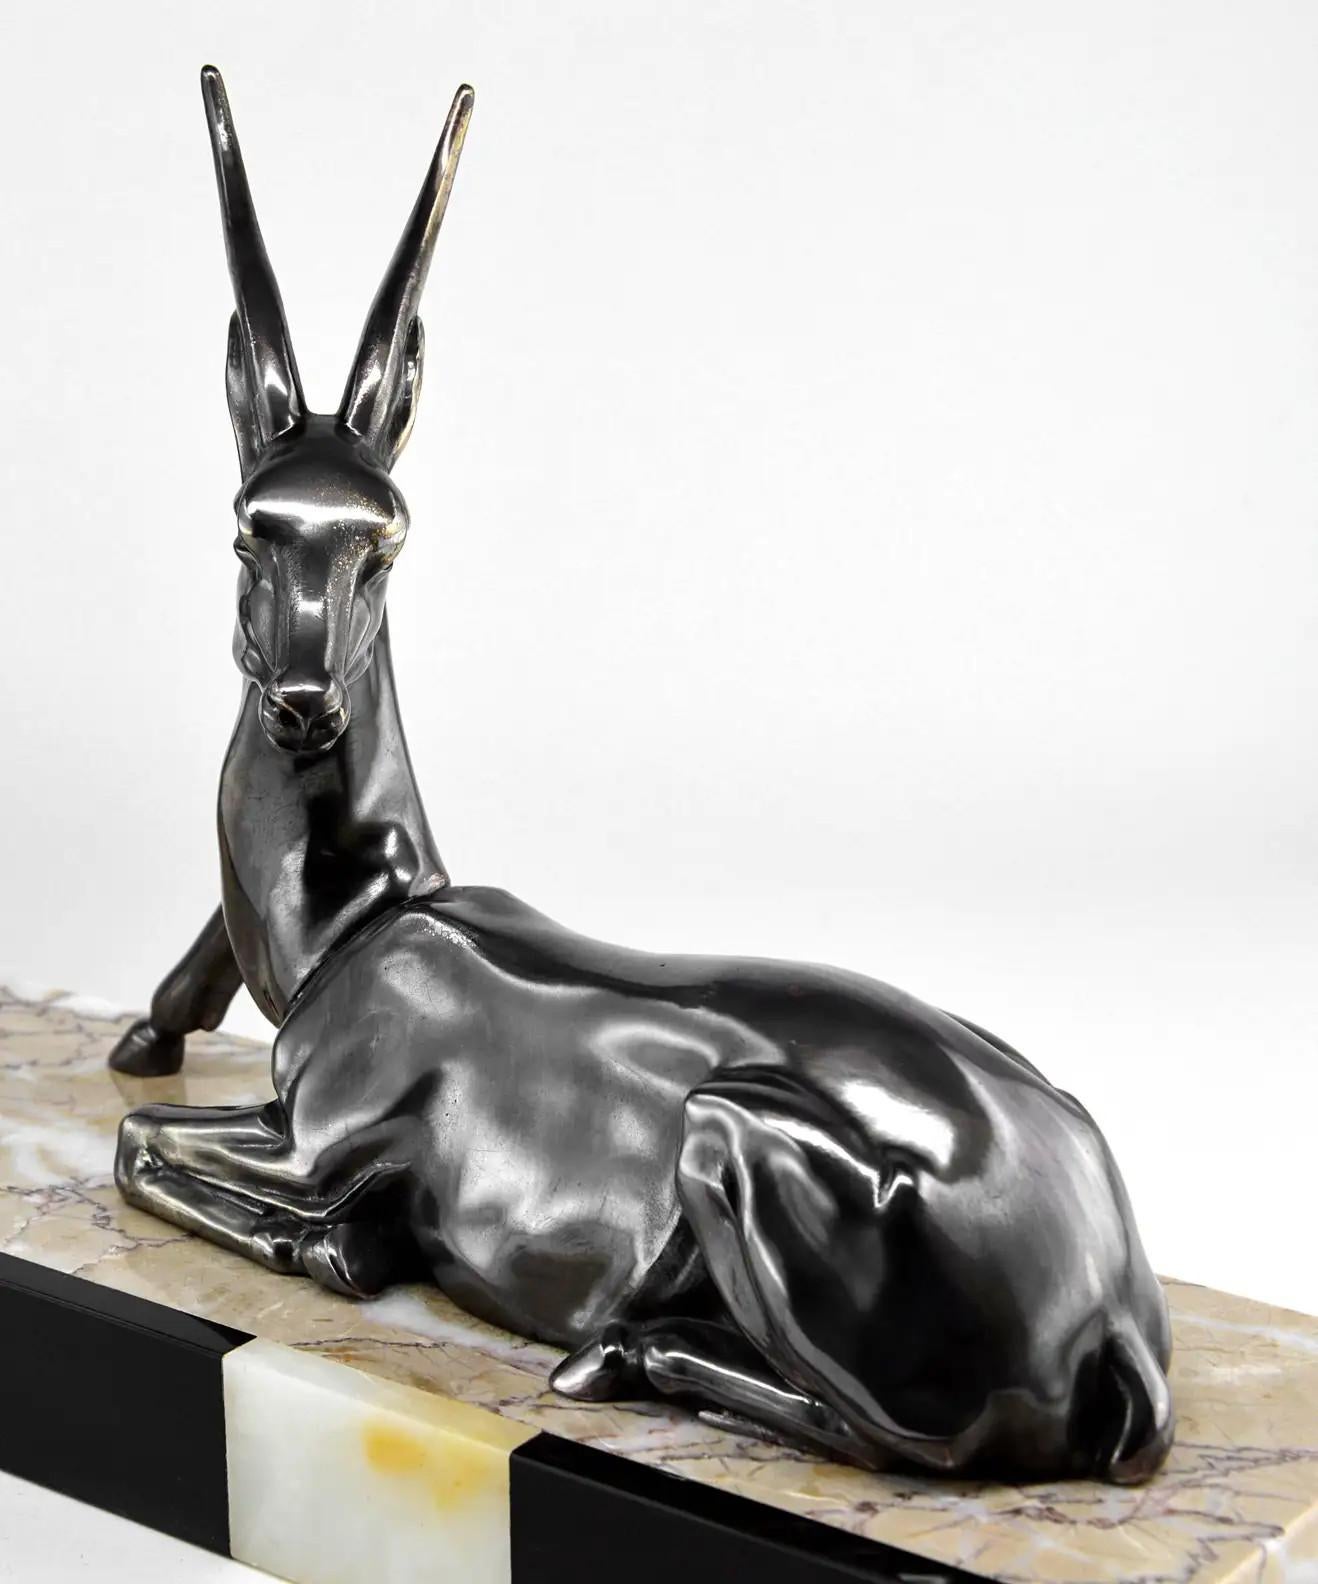 Antelope sculpture, France, 1930s. Spelter, marble and onyx. Measures: width 17.7